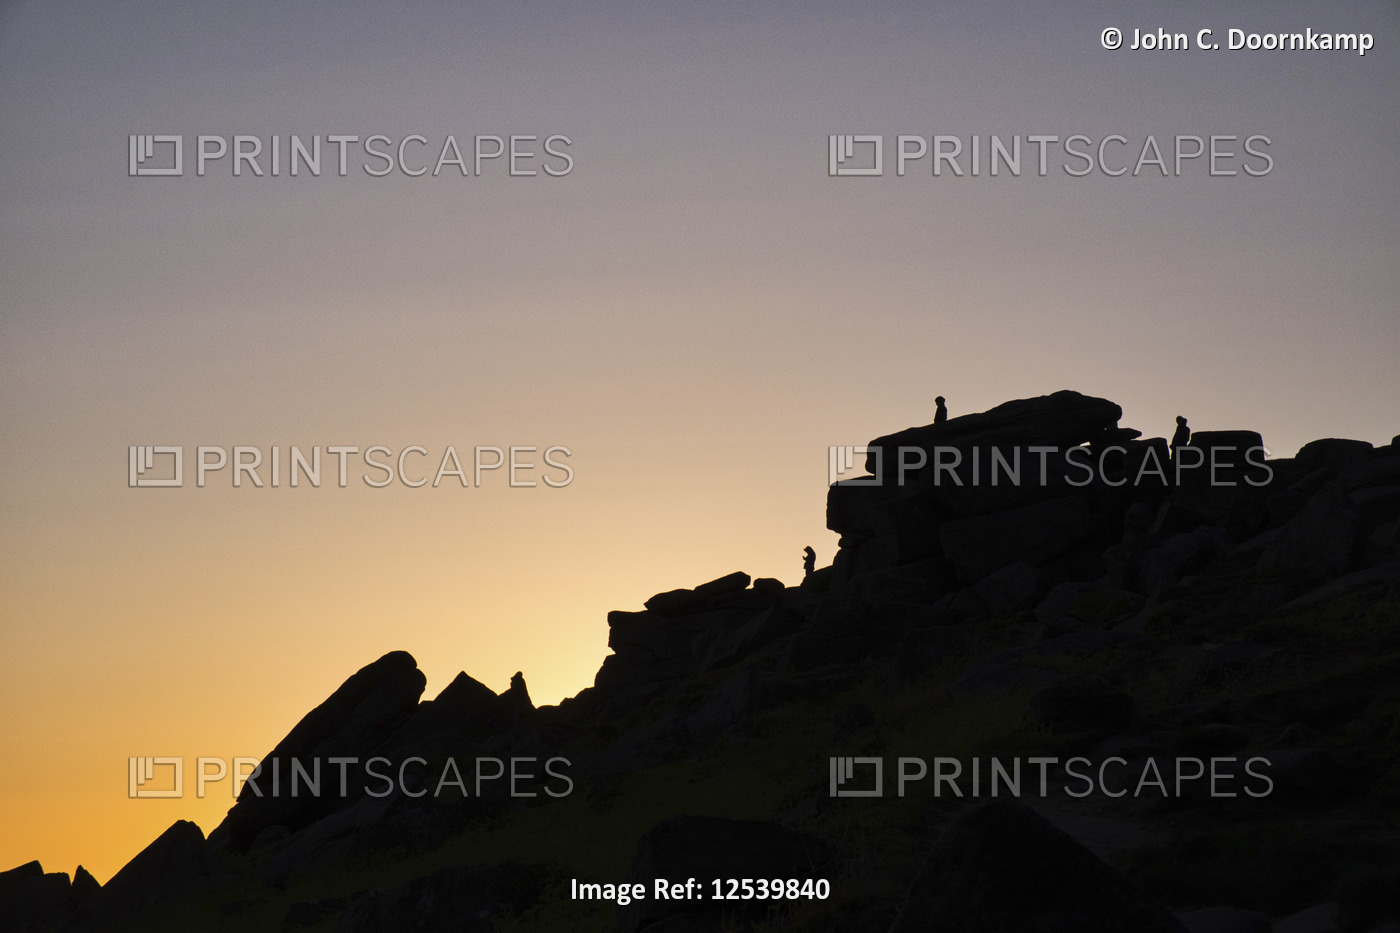 THE PROFILE OF A ROCKY OUTCROP AGAINST A SETTING SUN STANGE EDGE DERBYSHIRE ENGLAND